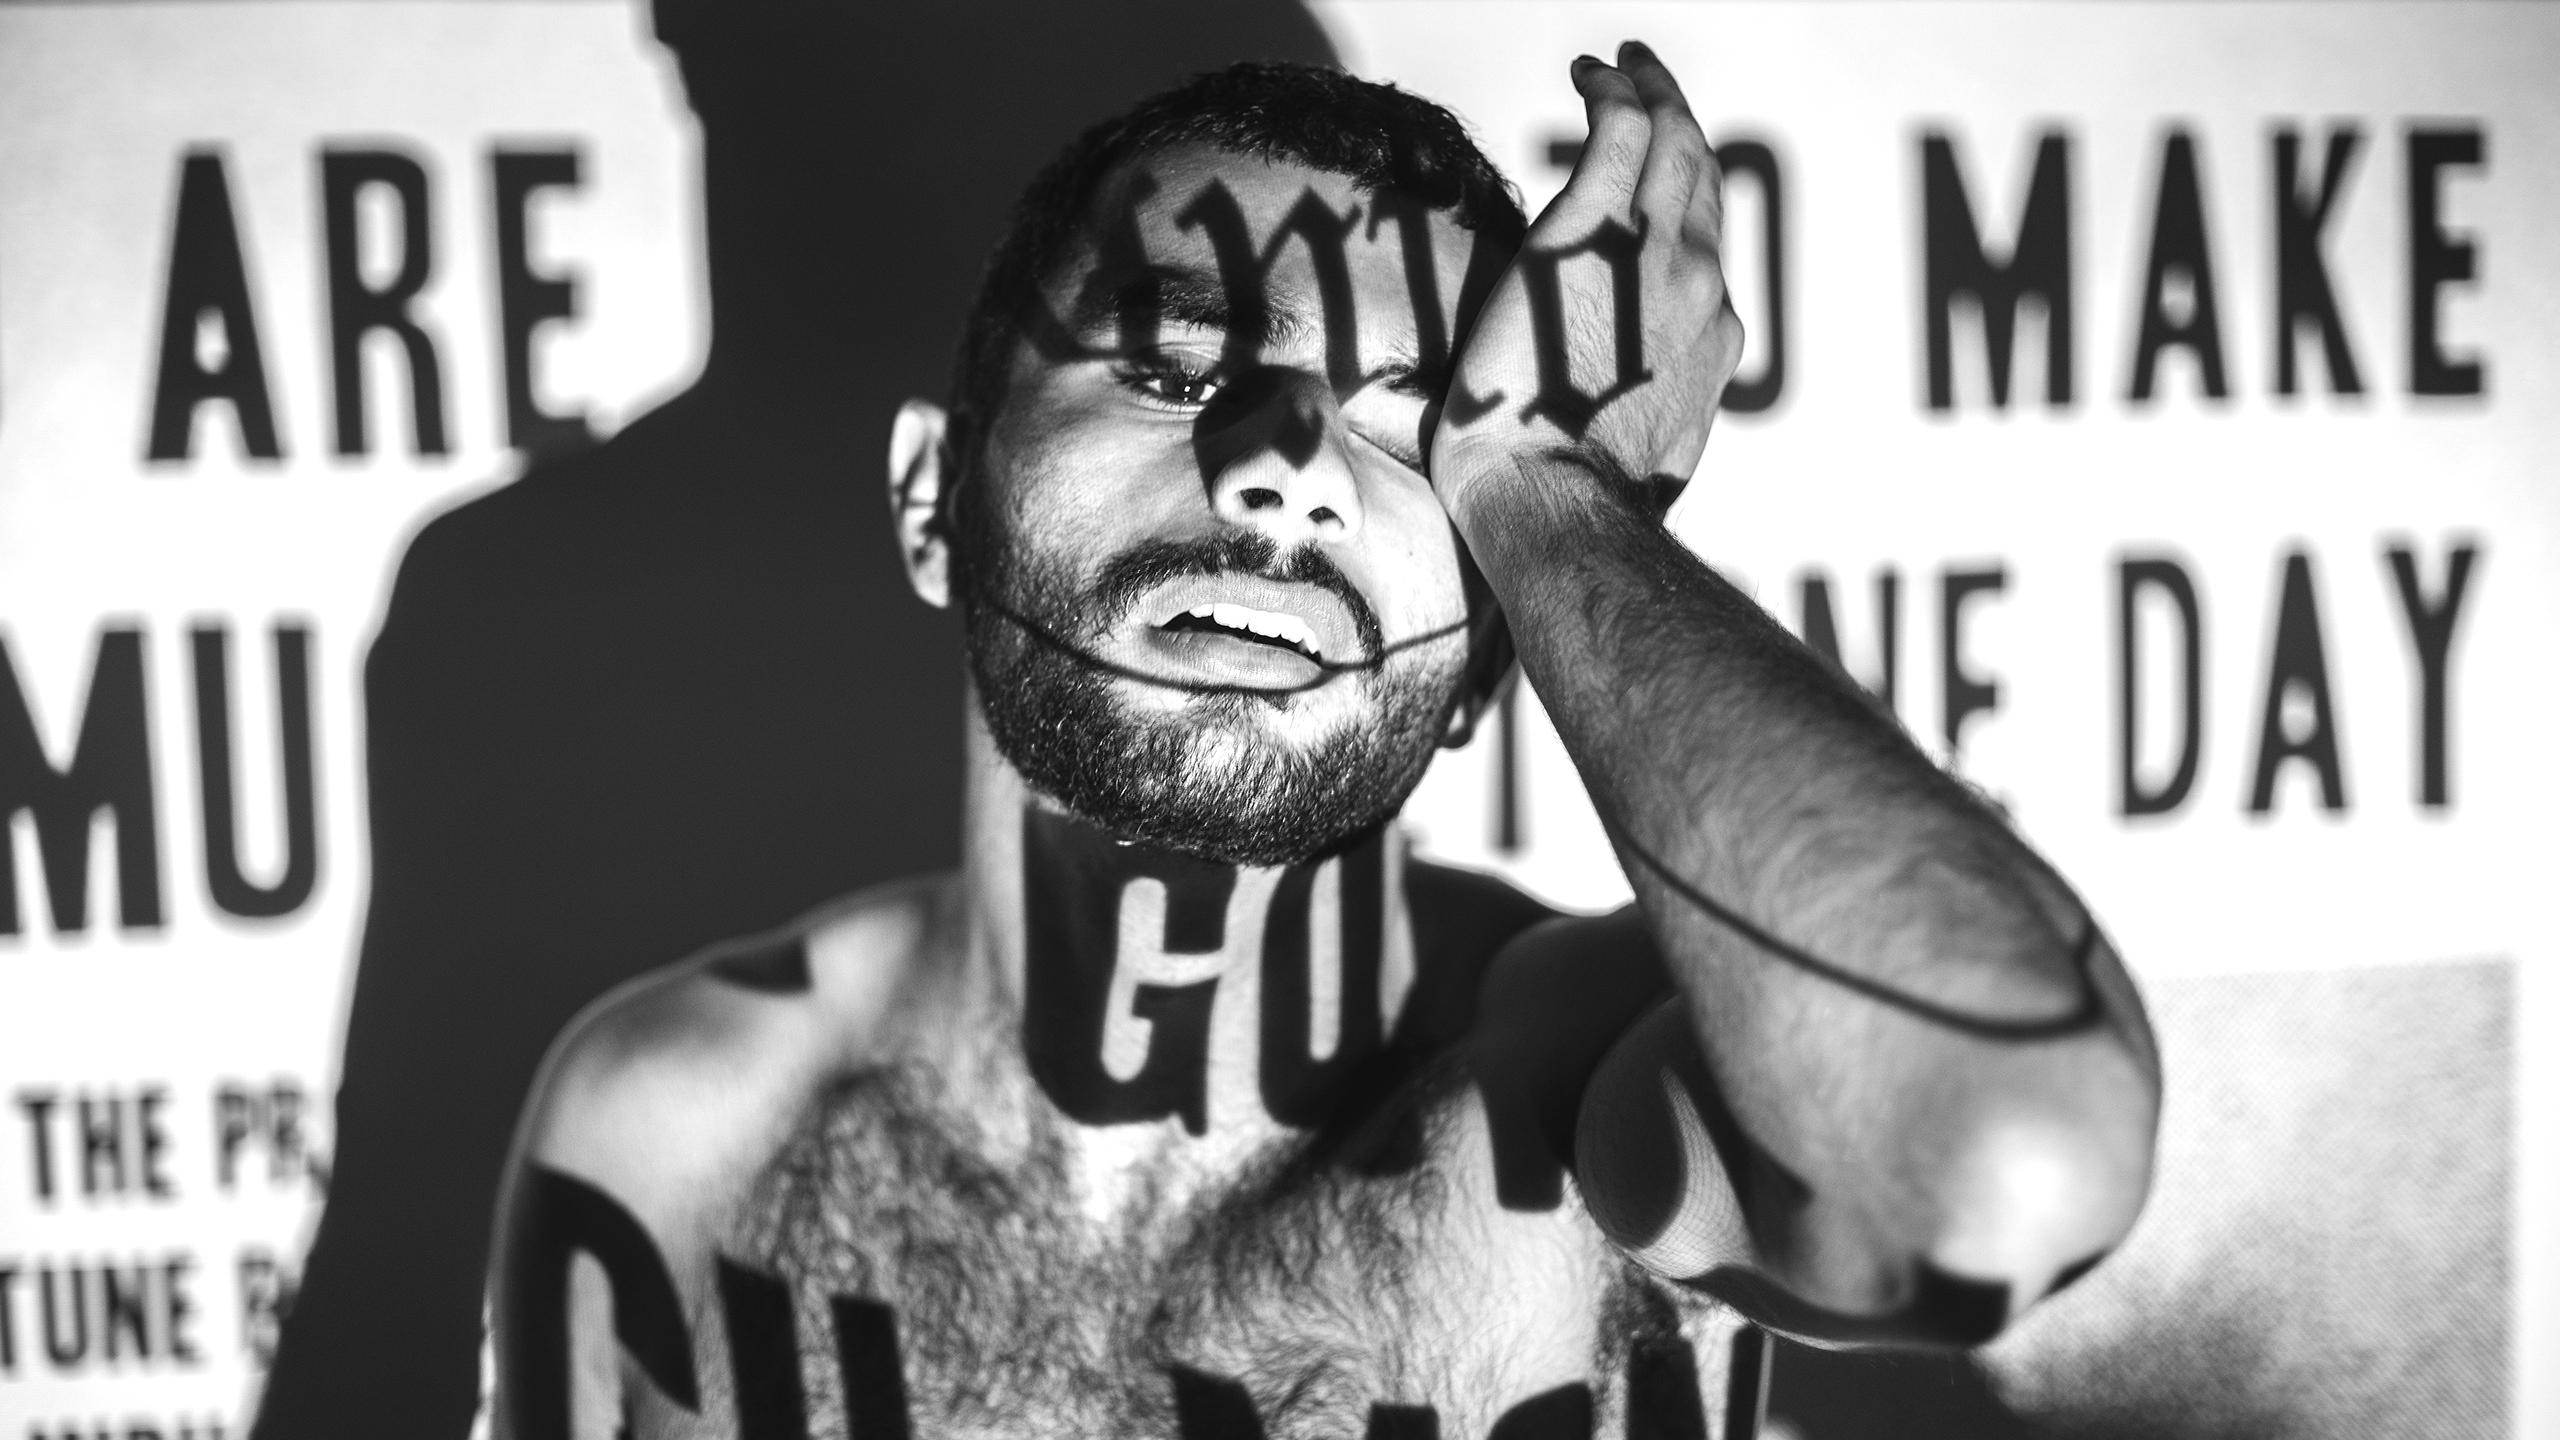 A black and white photo of a topless man with newspaper projection on his body that say terrible things